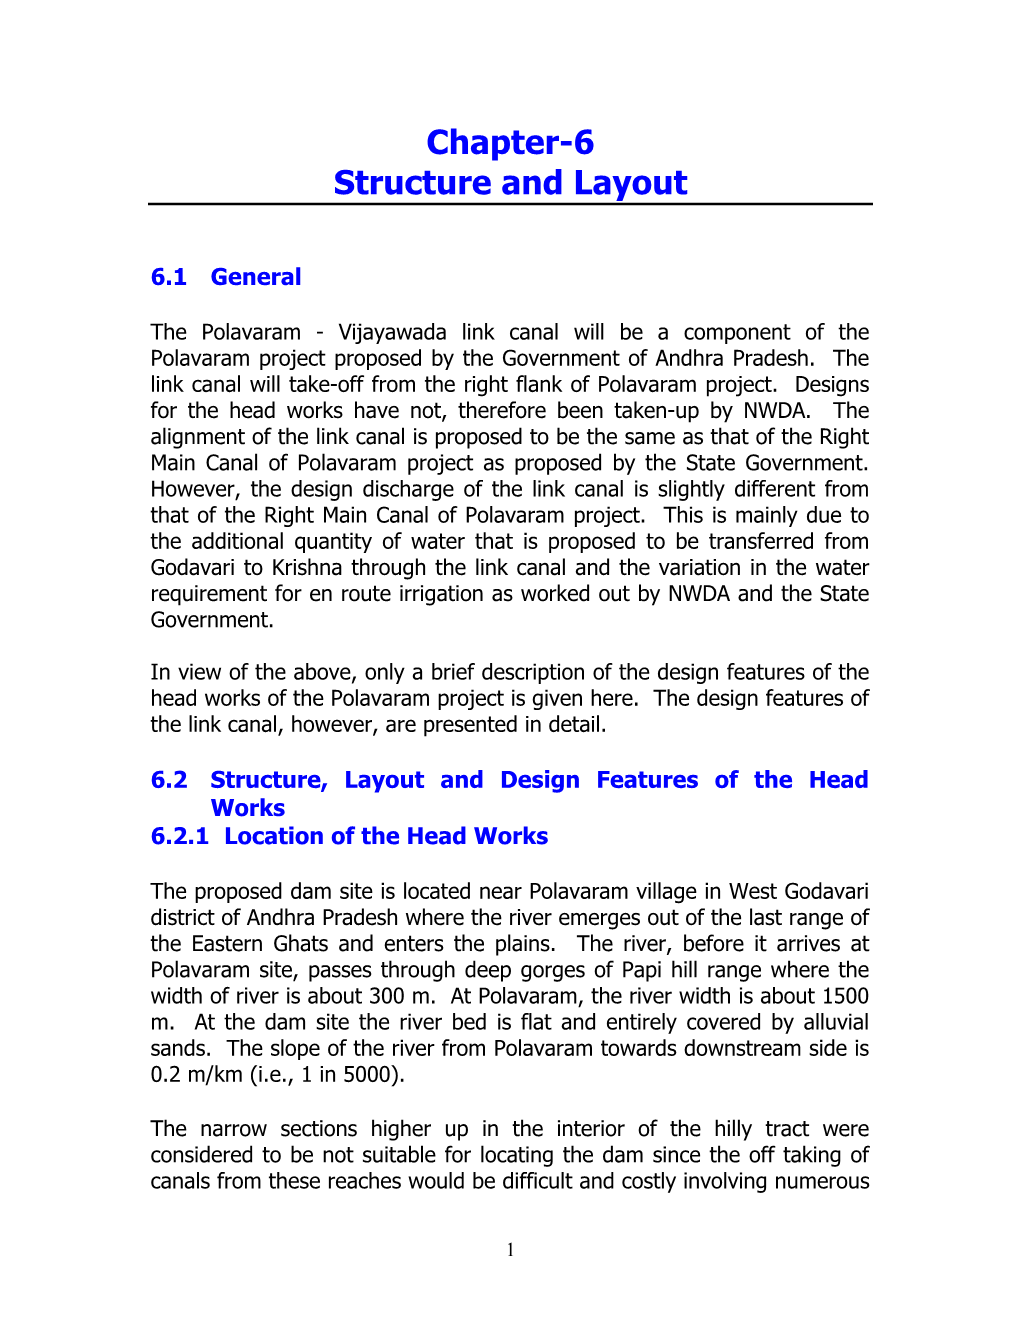 Structure and Layout